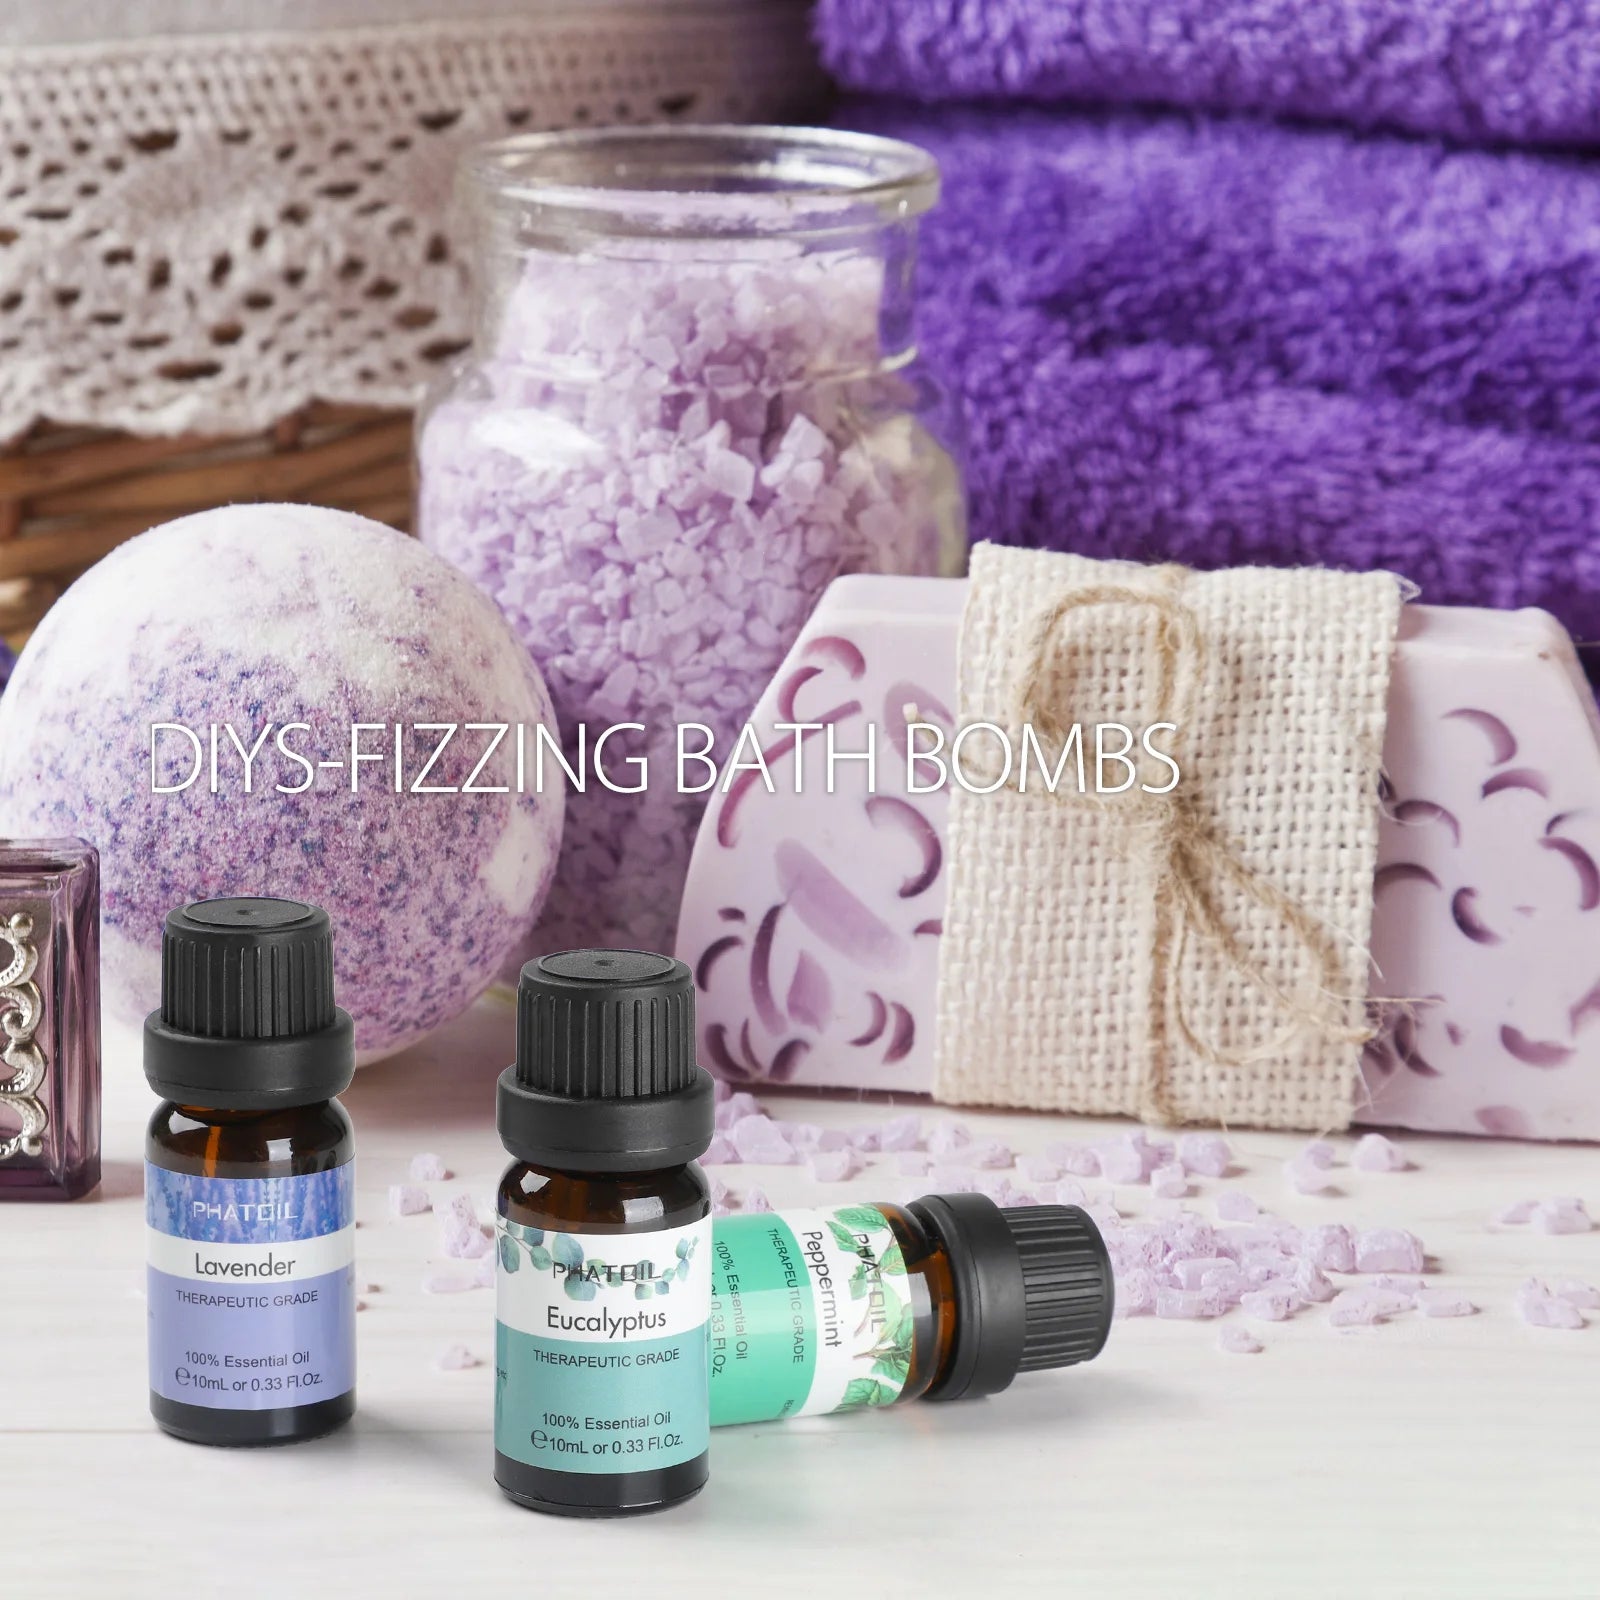 10ml Essential Oils for Humidifier